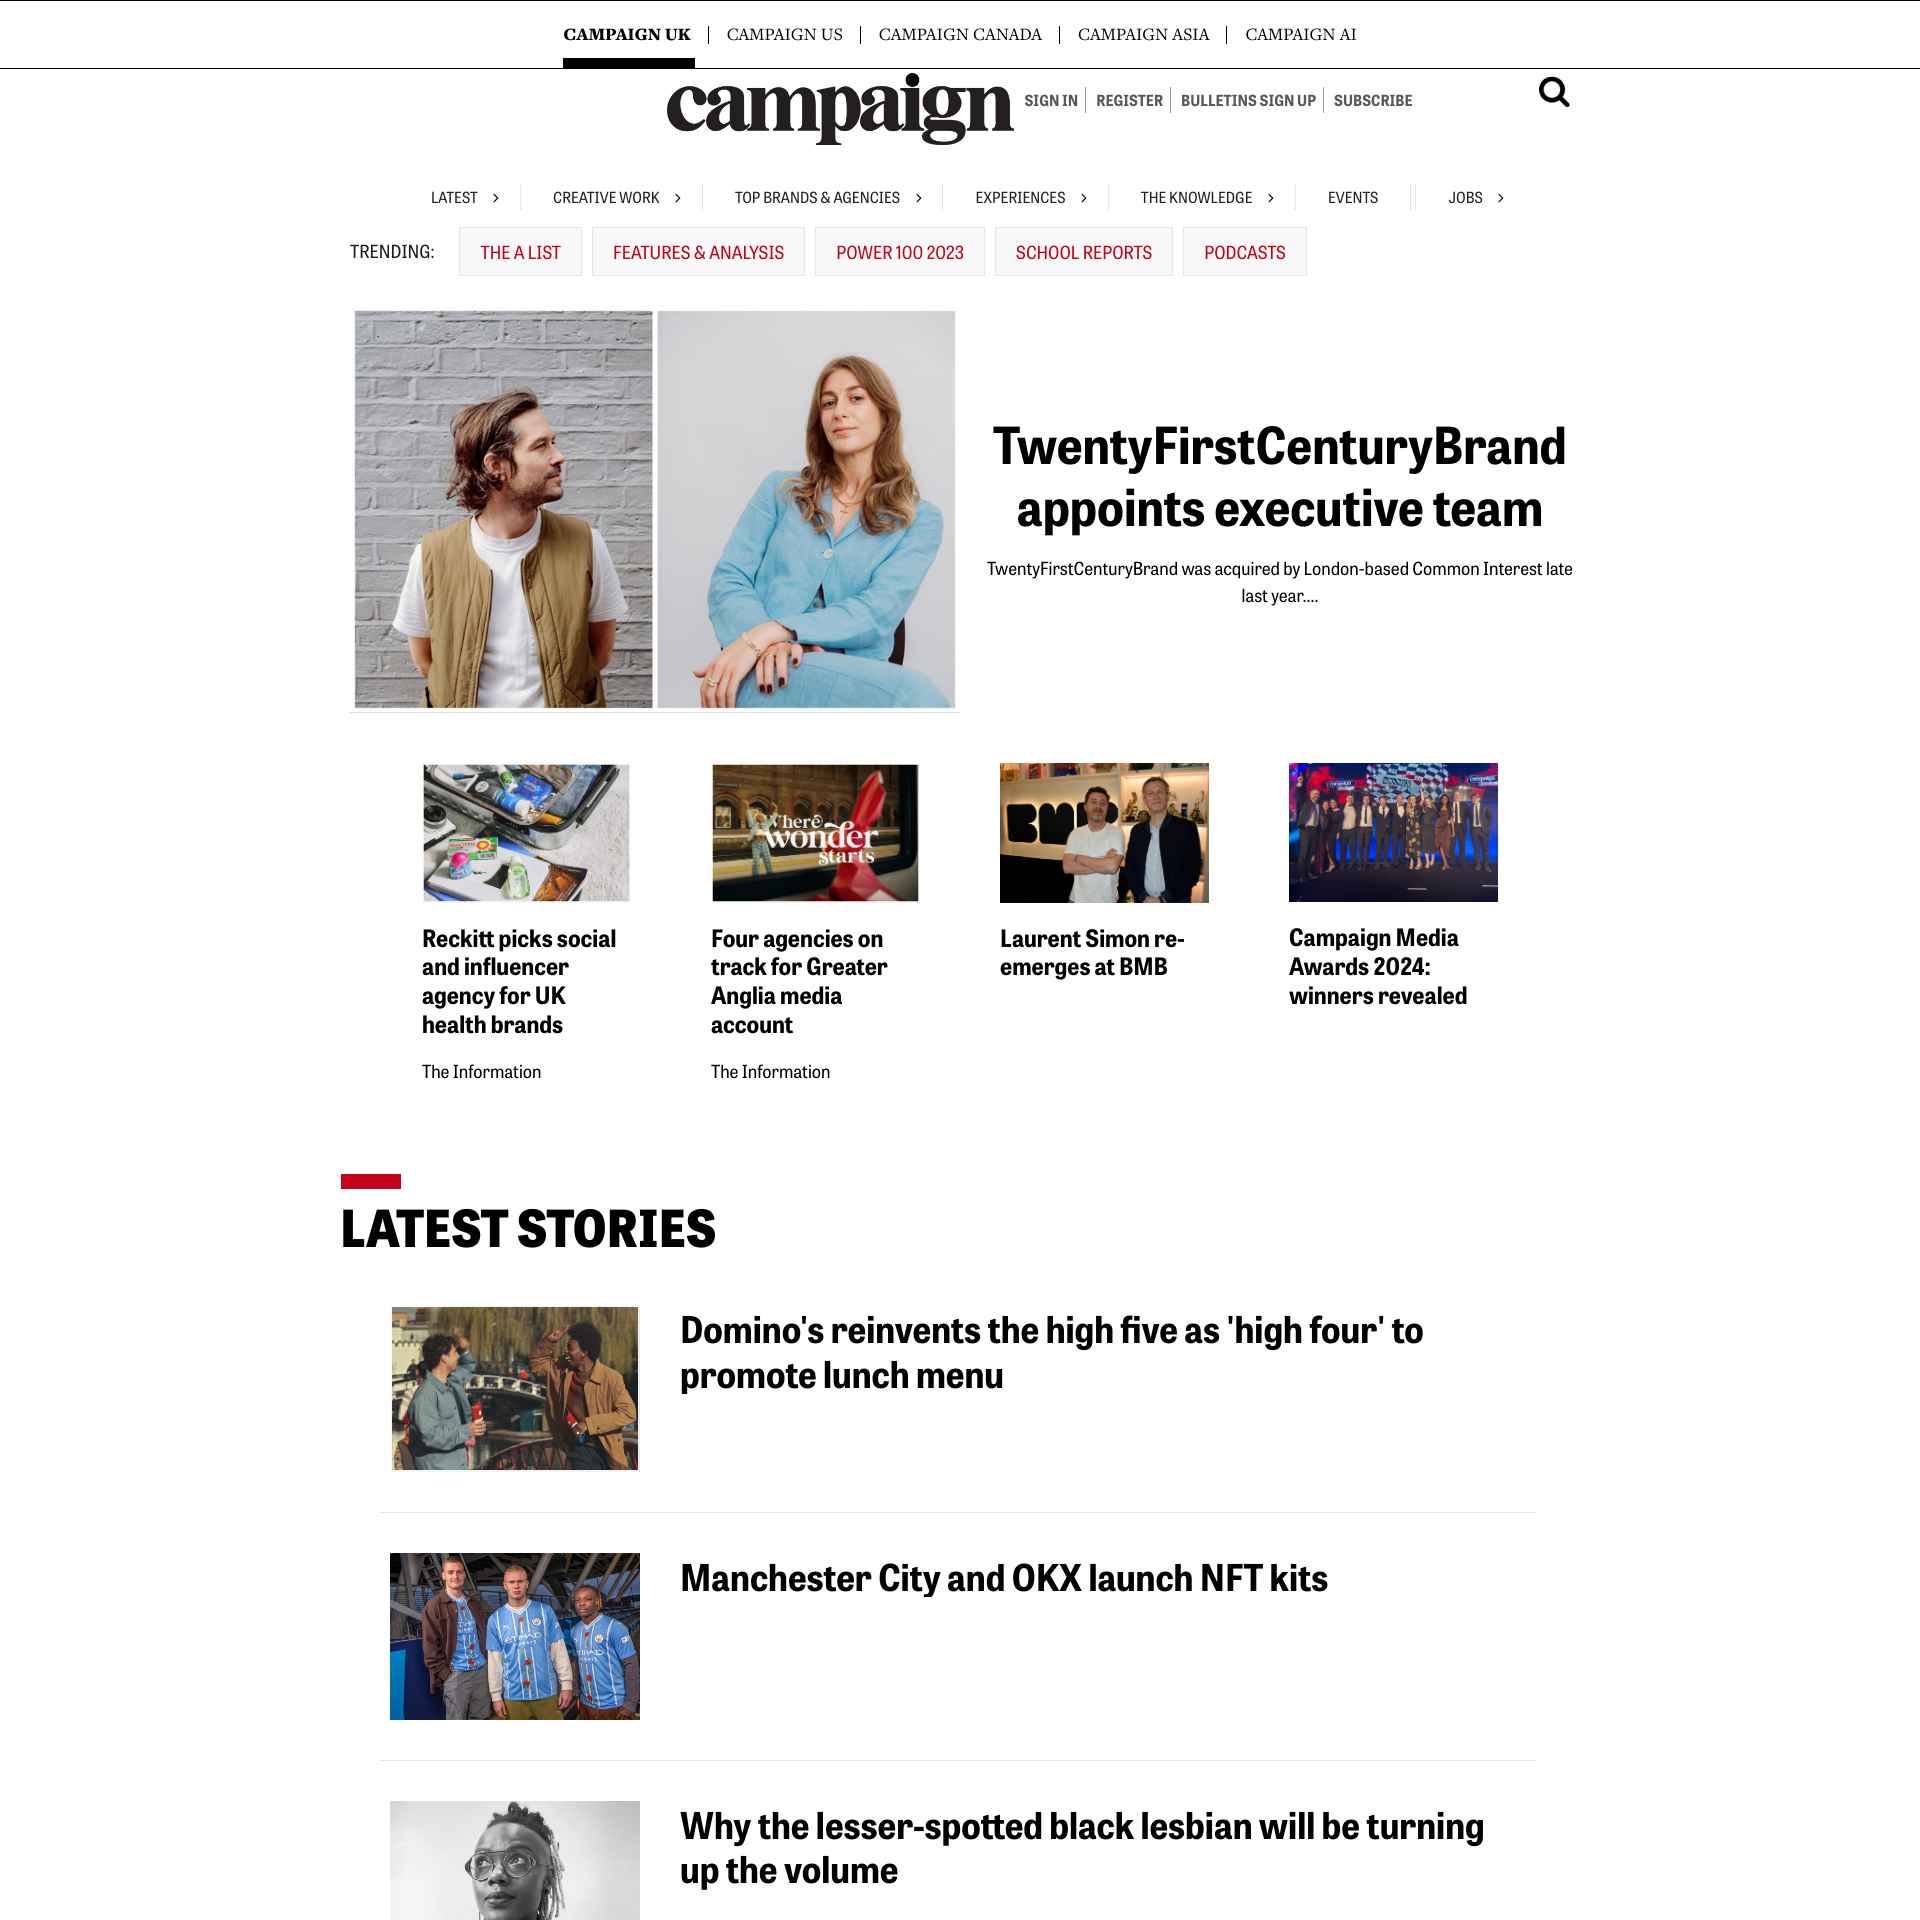 Campaignlive.co.uk: Keeping You Informed on the Latest Marketing and Advertising News